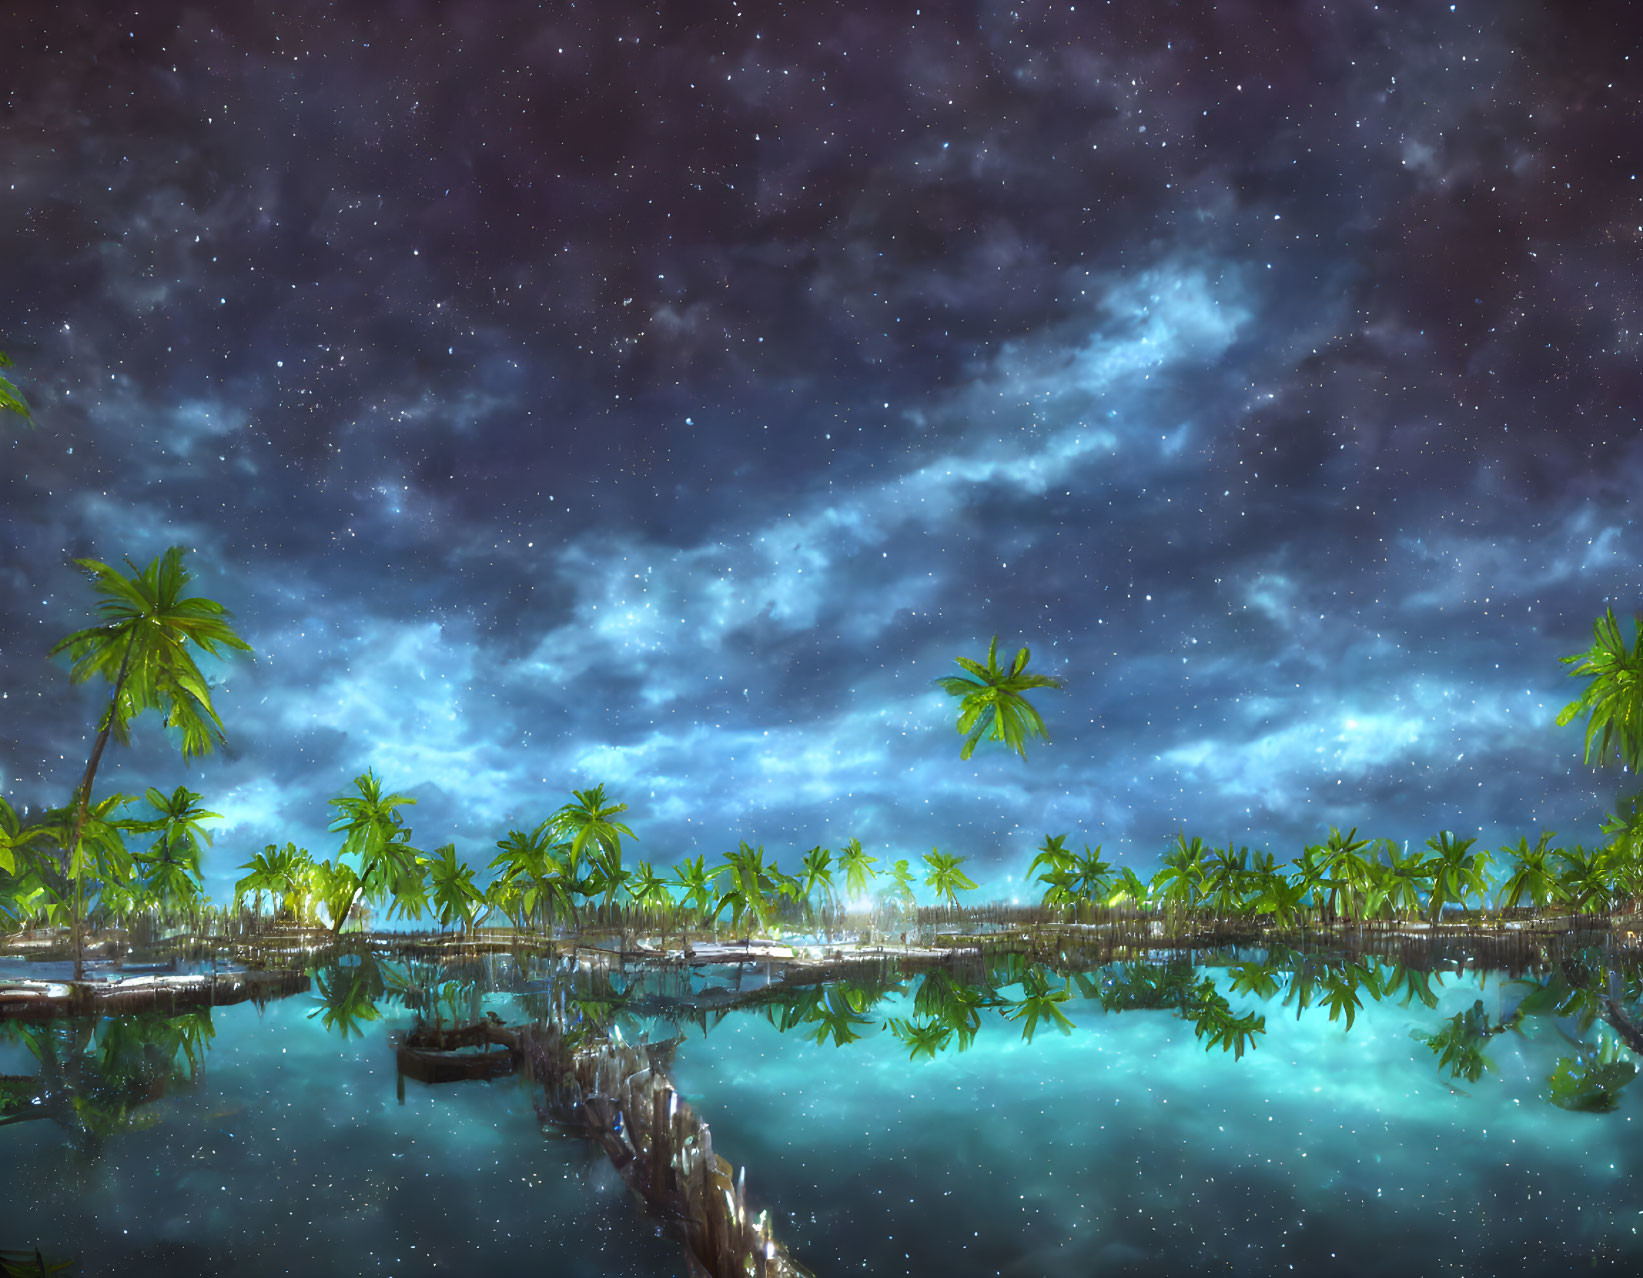 Nighttime Tropical Scene with Palm Trees, Reflective Water, Starry Sky